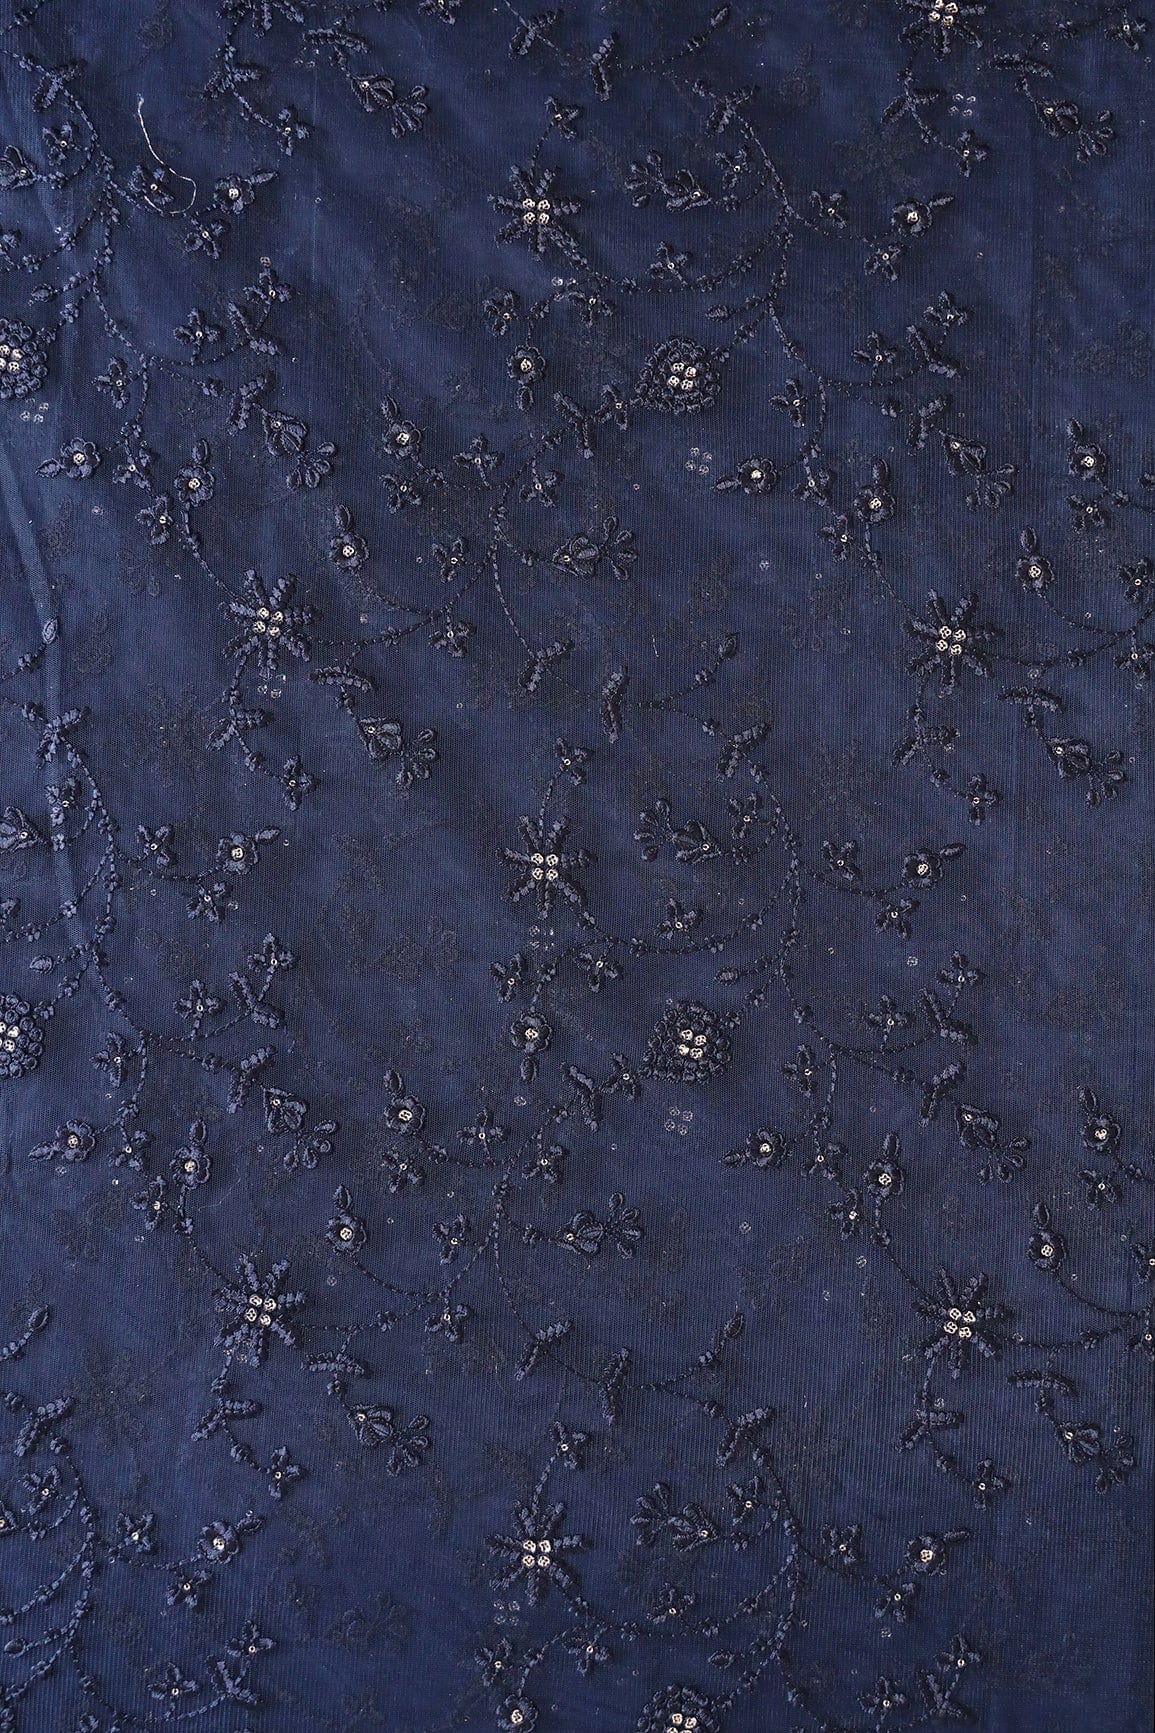 doeraa Embroidery Fabrics 3 Meter Cut Piece Of Blue Thread With Gold Sequins Floral Embroidery Work On Navy Blue Soft net Fabric